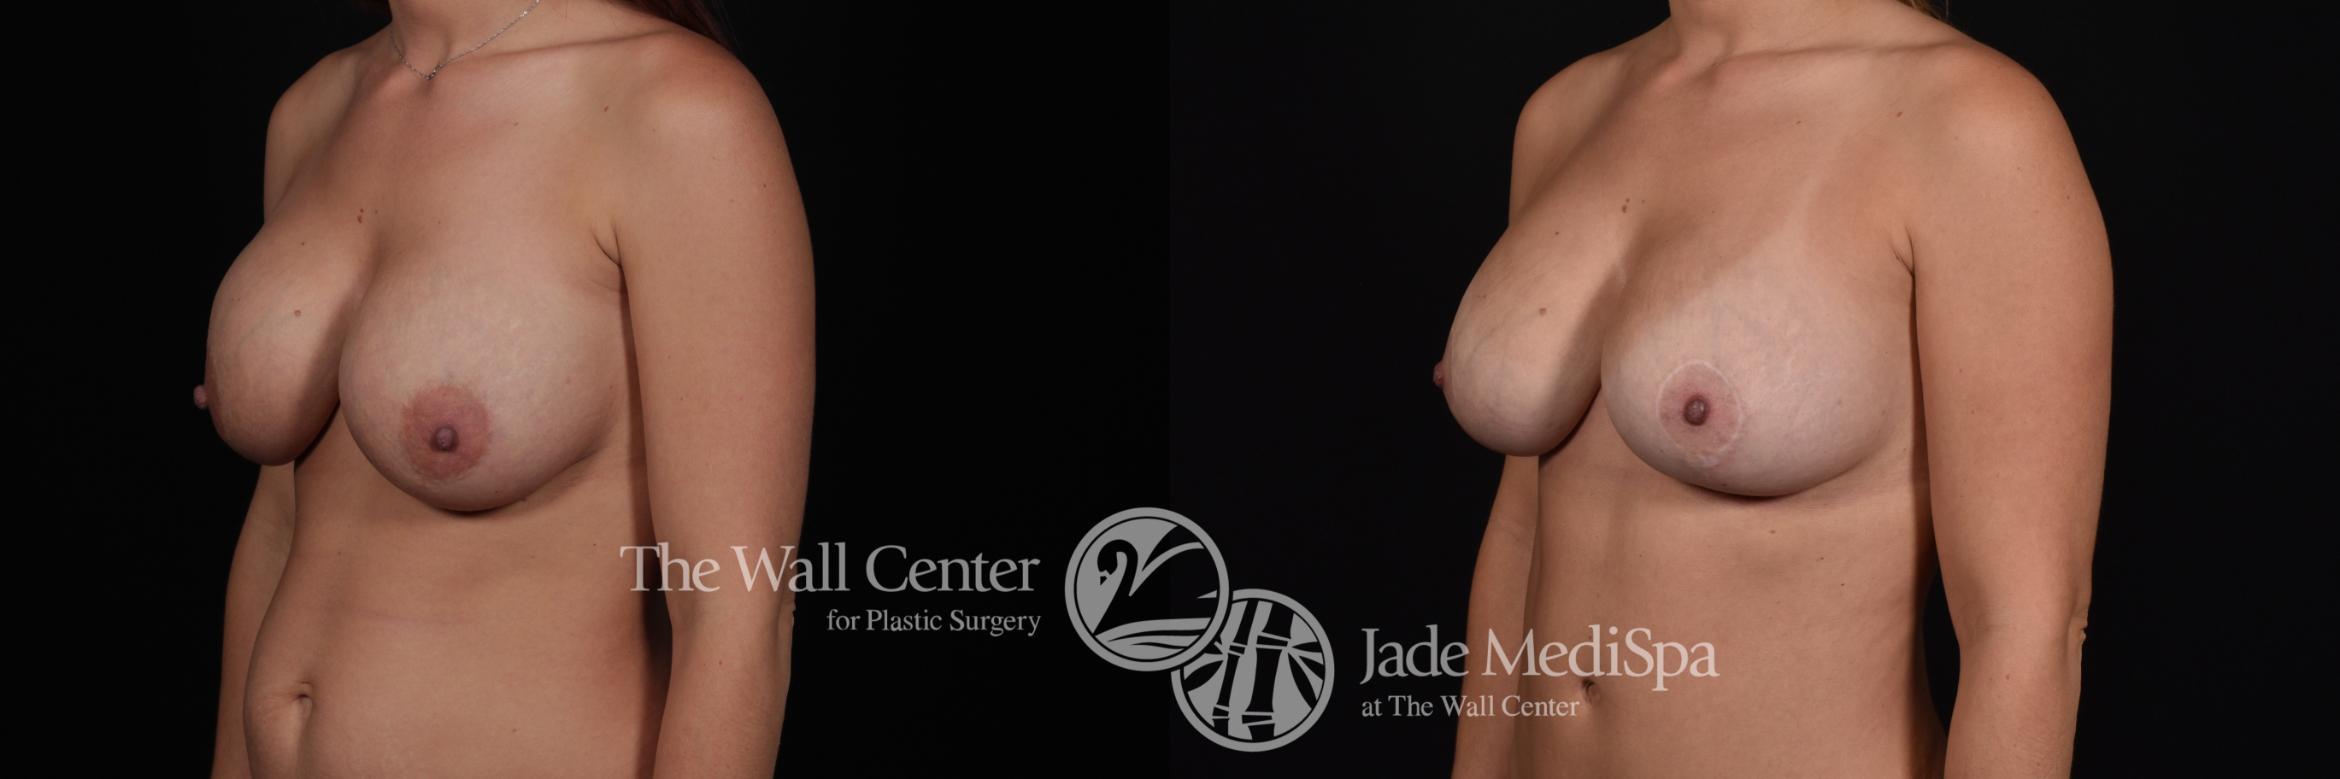 Breast Implant Exchange Front Photo, Shreveport, Louisiana, The Wall Center for Plastic Surgery, Case 863